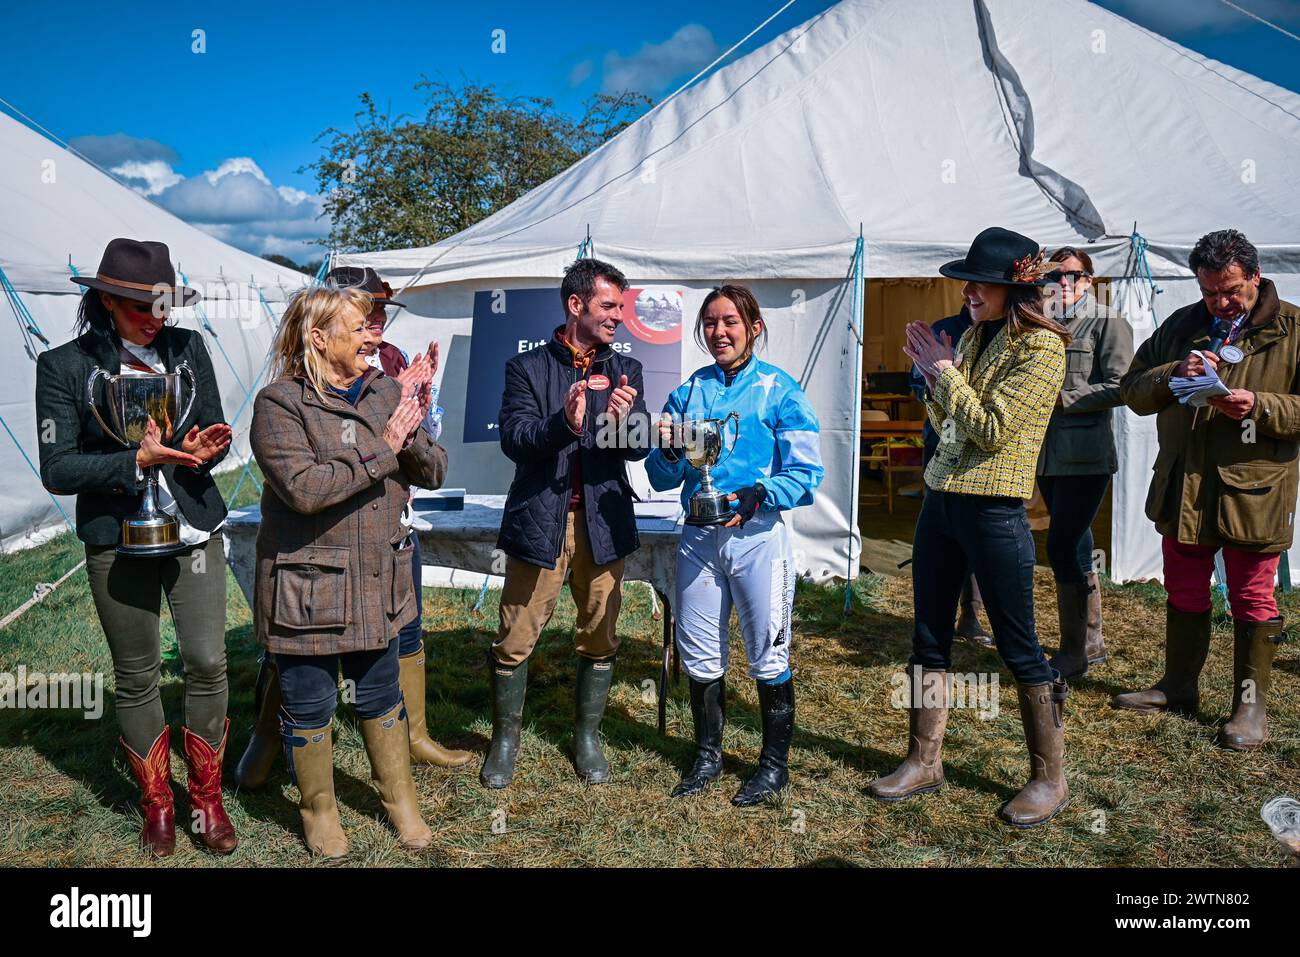 Eyton races - point 2 point Horse Racing Banque D'Images